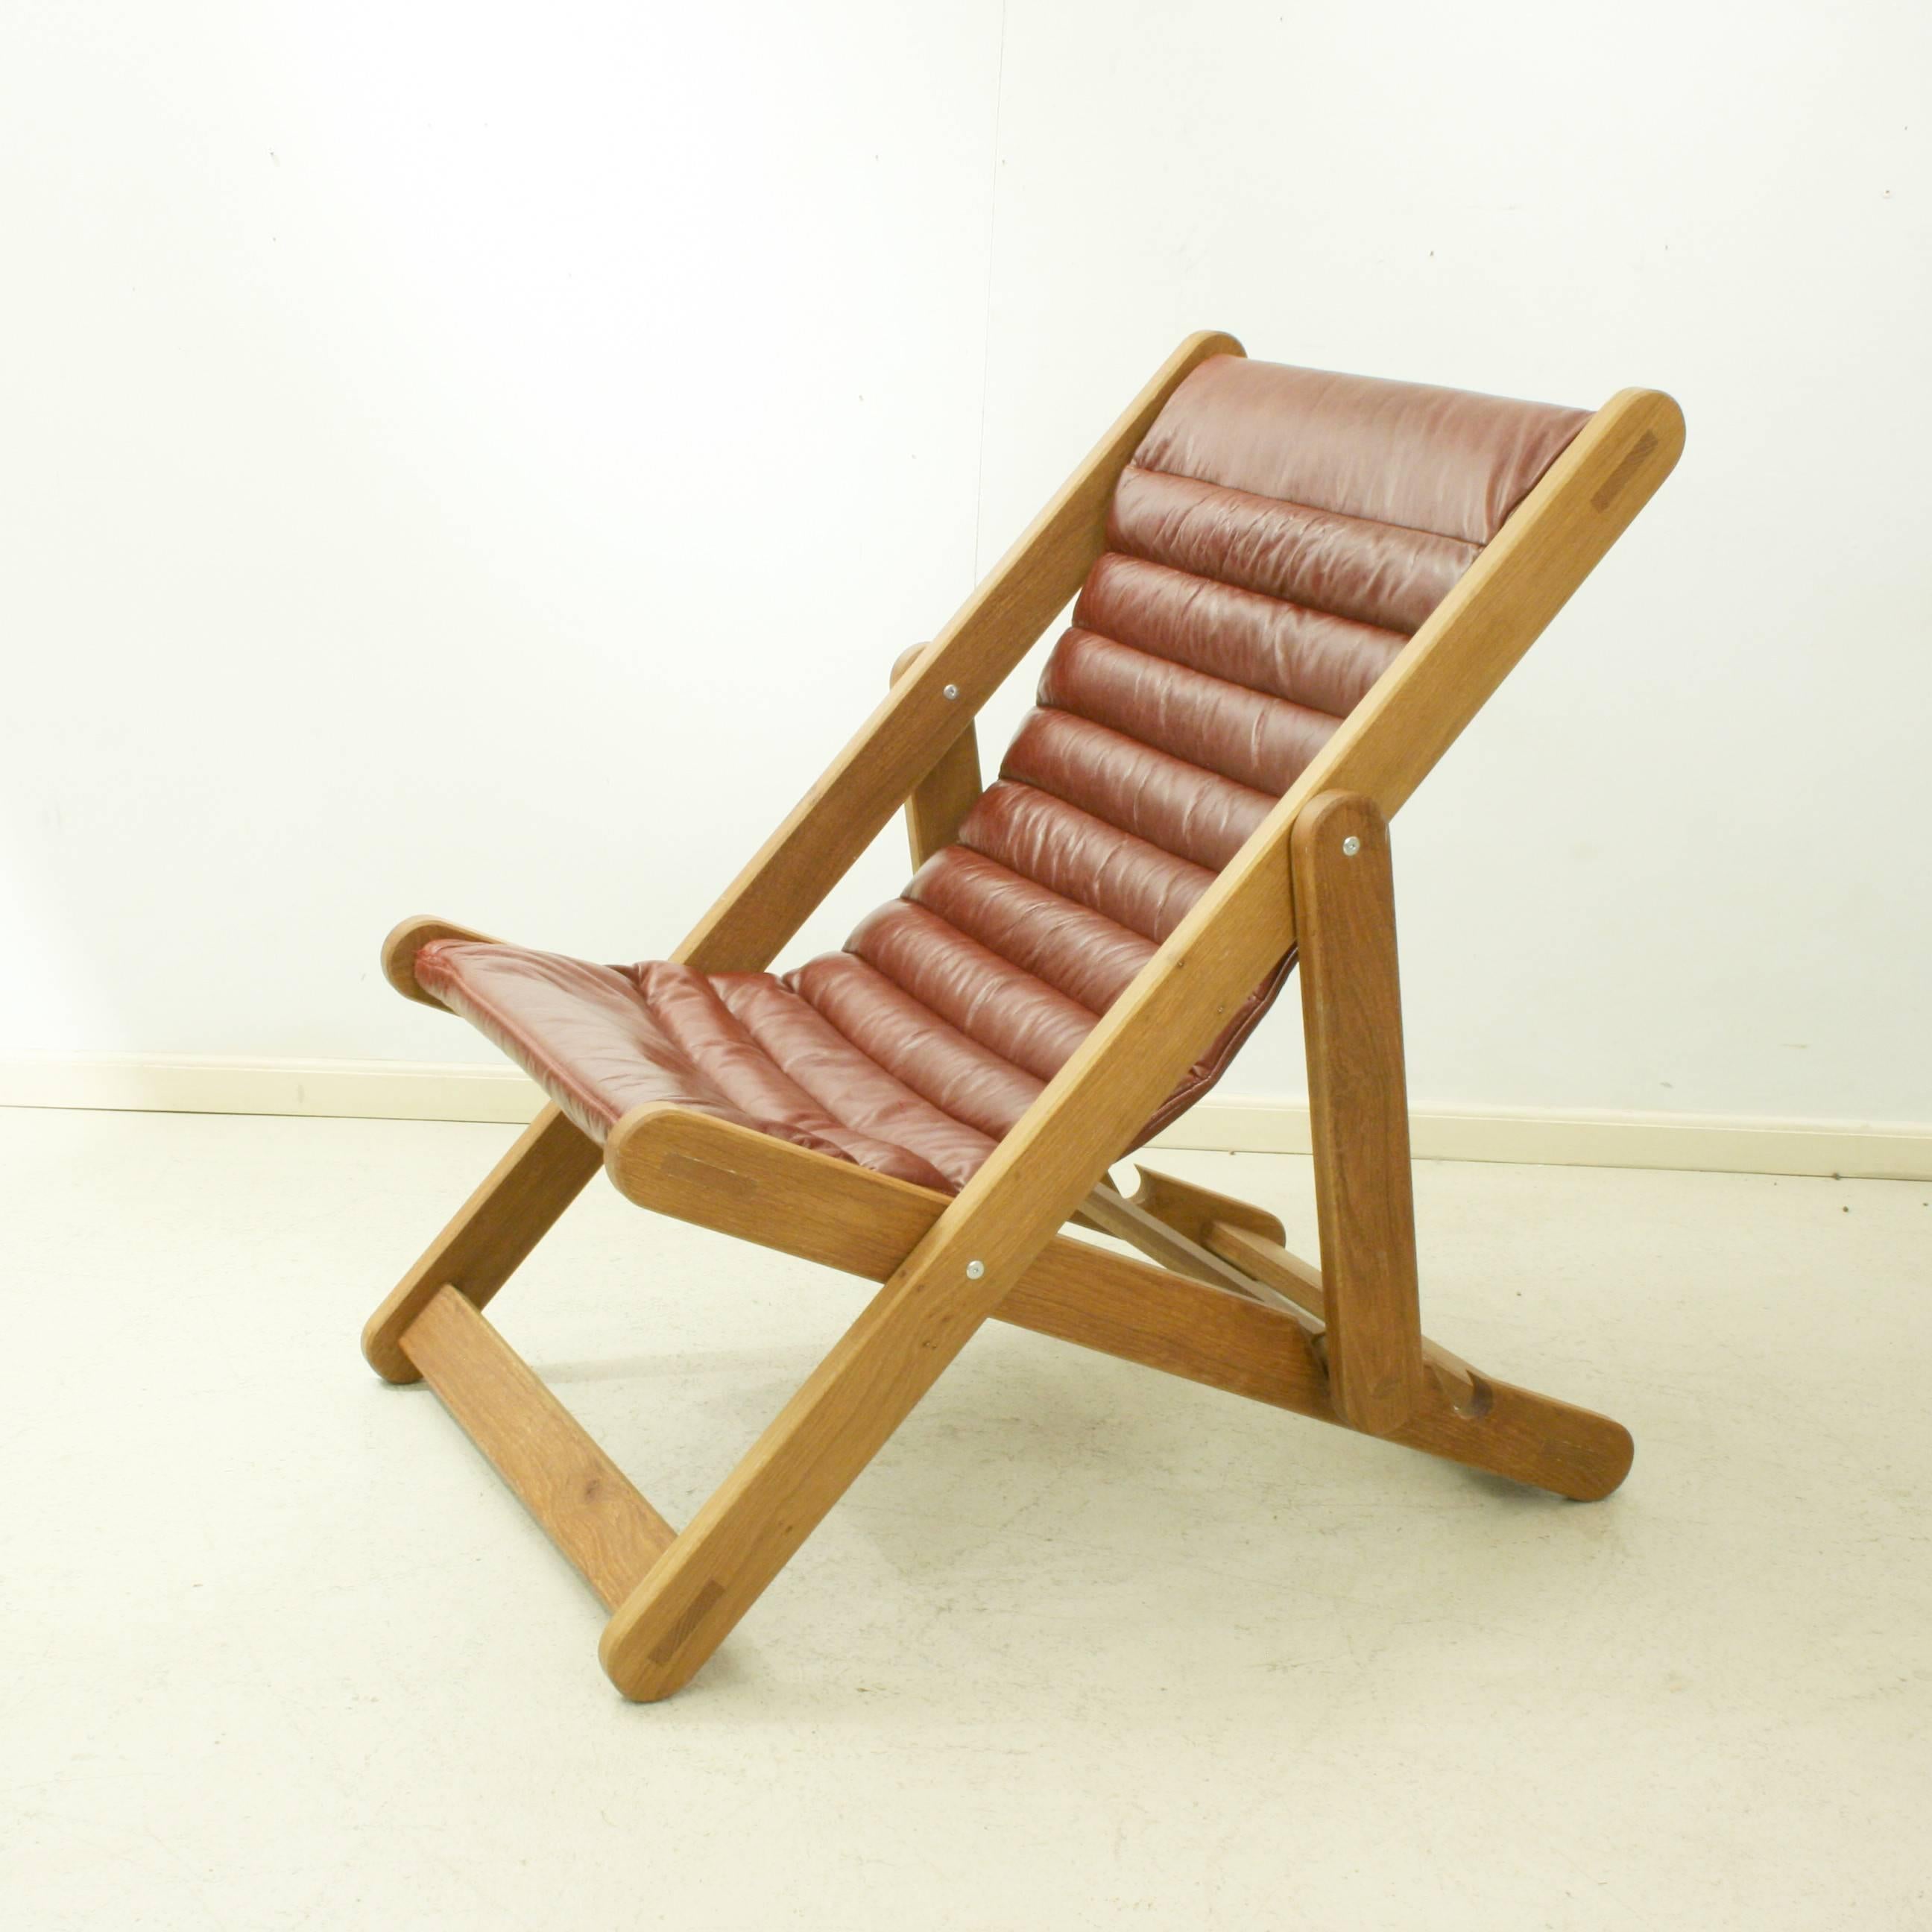 An extremely sturdy leather covered deck chair made with an oak frame. This is a heavy duty Traditional design English deck chair with two seating positions. The chair is very comfortable as the red leather sling seat is with extra padding. A